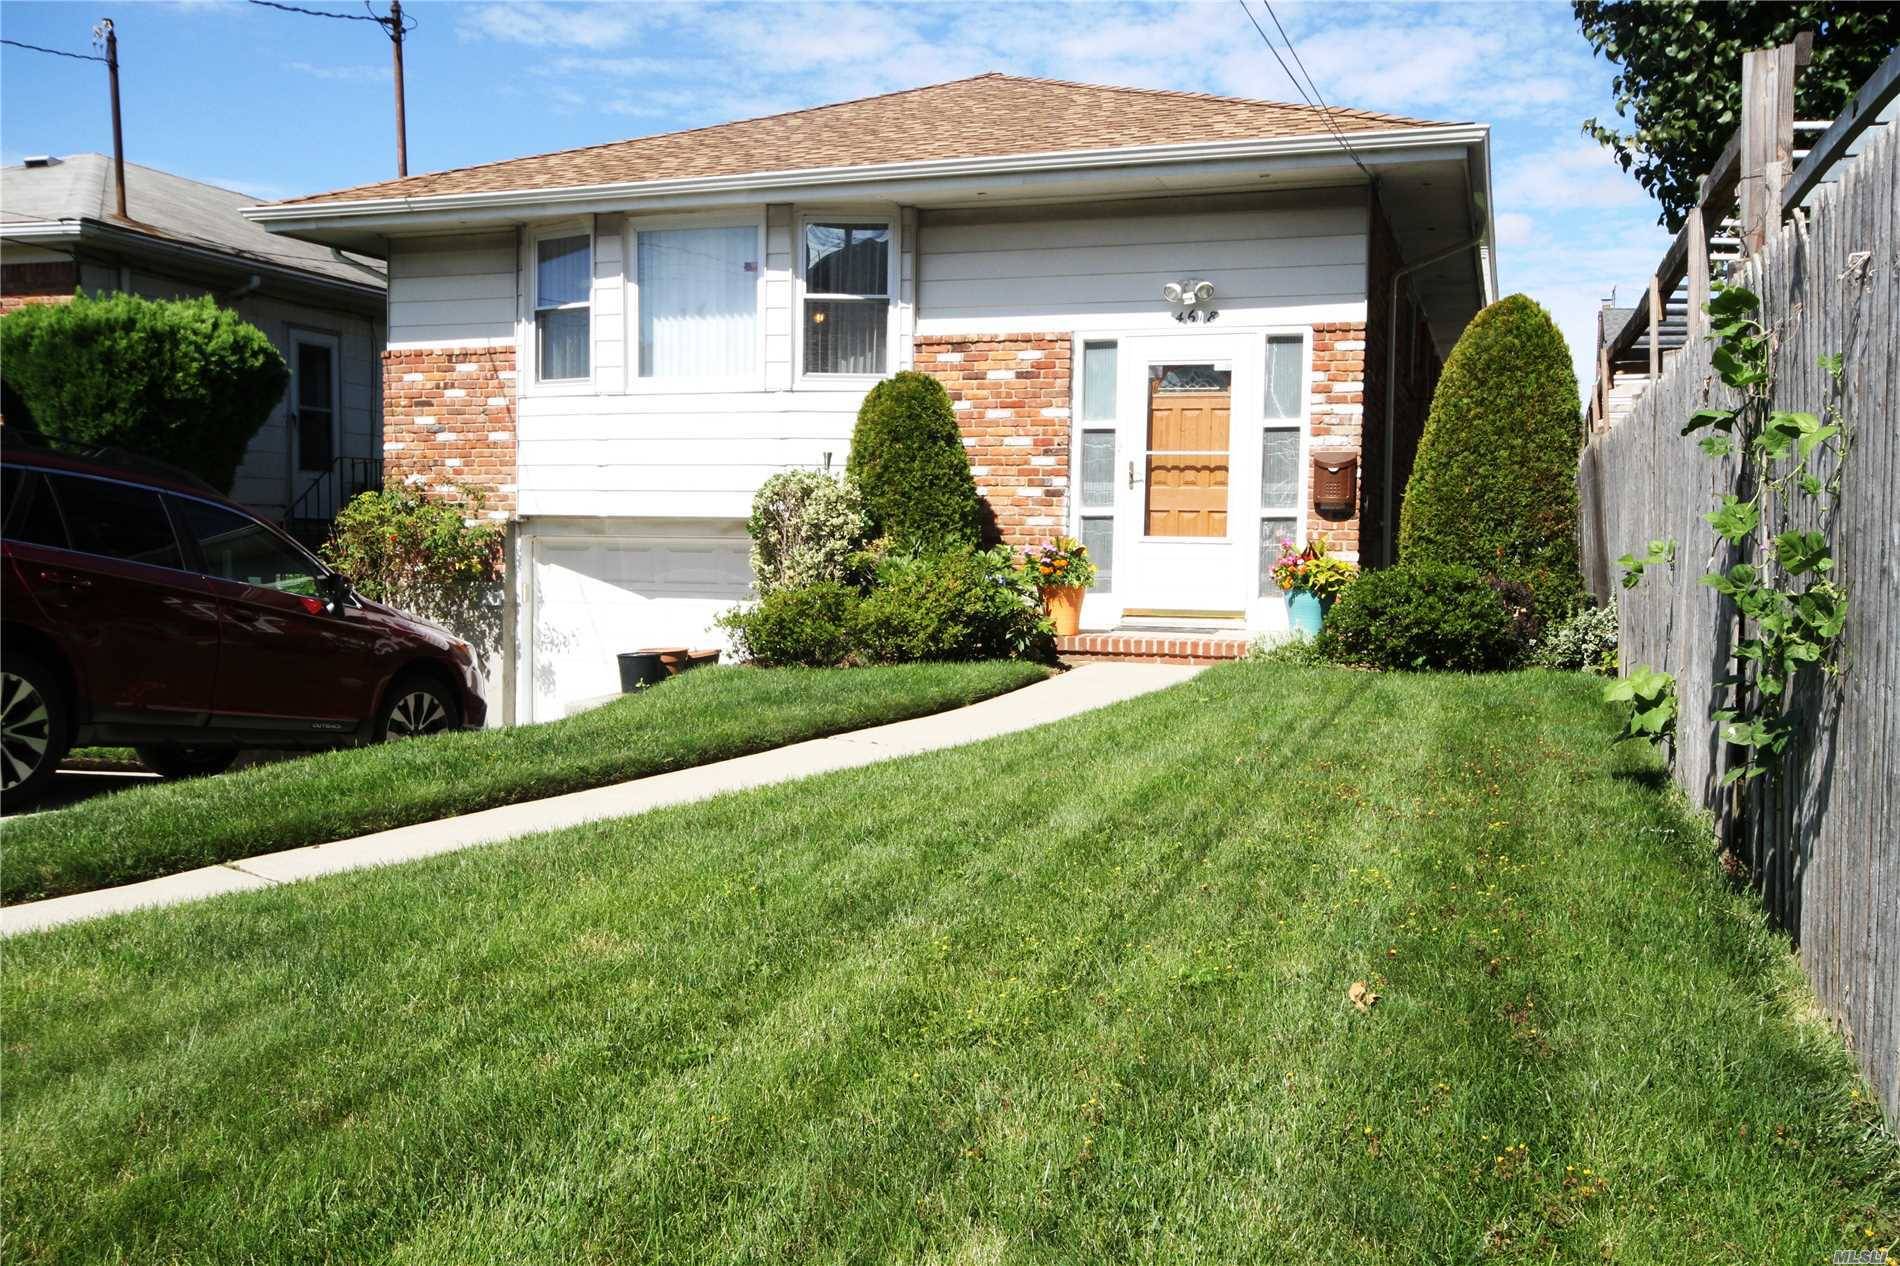 Solid Brick, Detached, Hi Ranch On An Extra Long 37' By 125' Property Located In The Kissena Park Section Of Flushing.